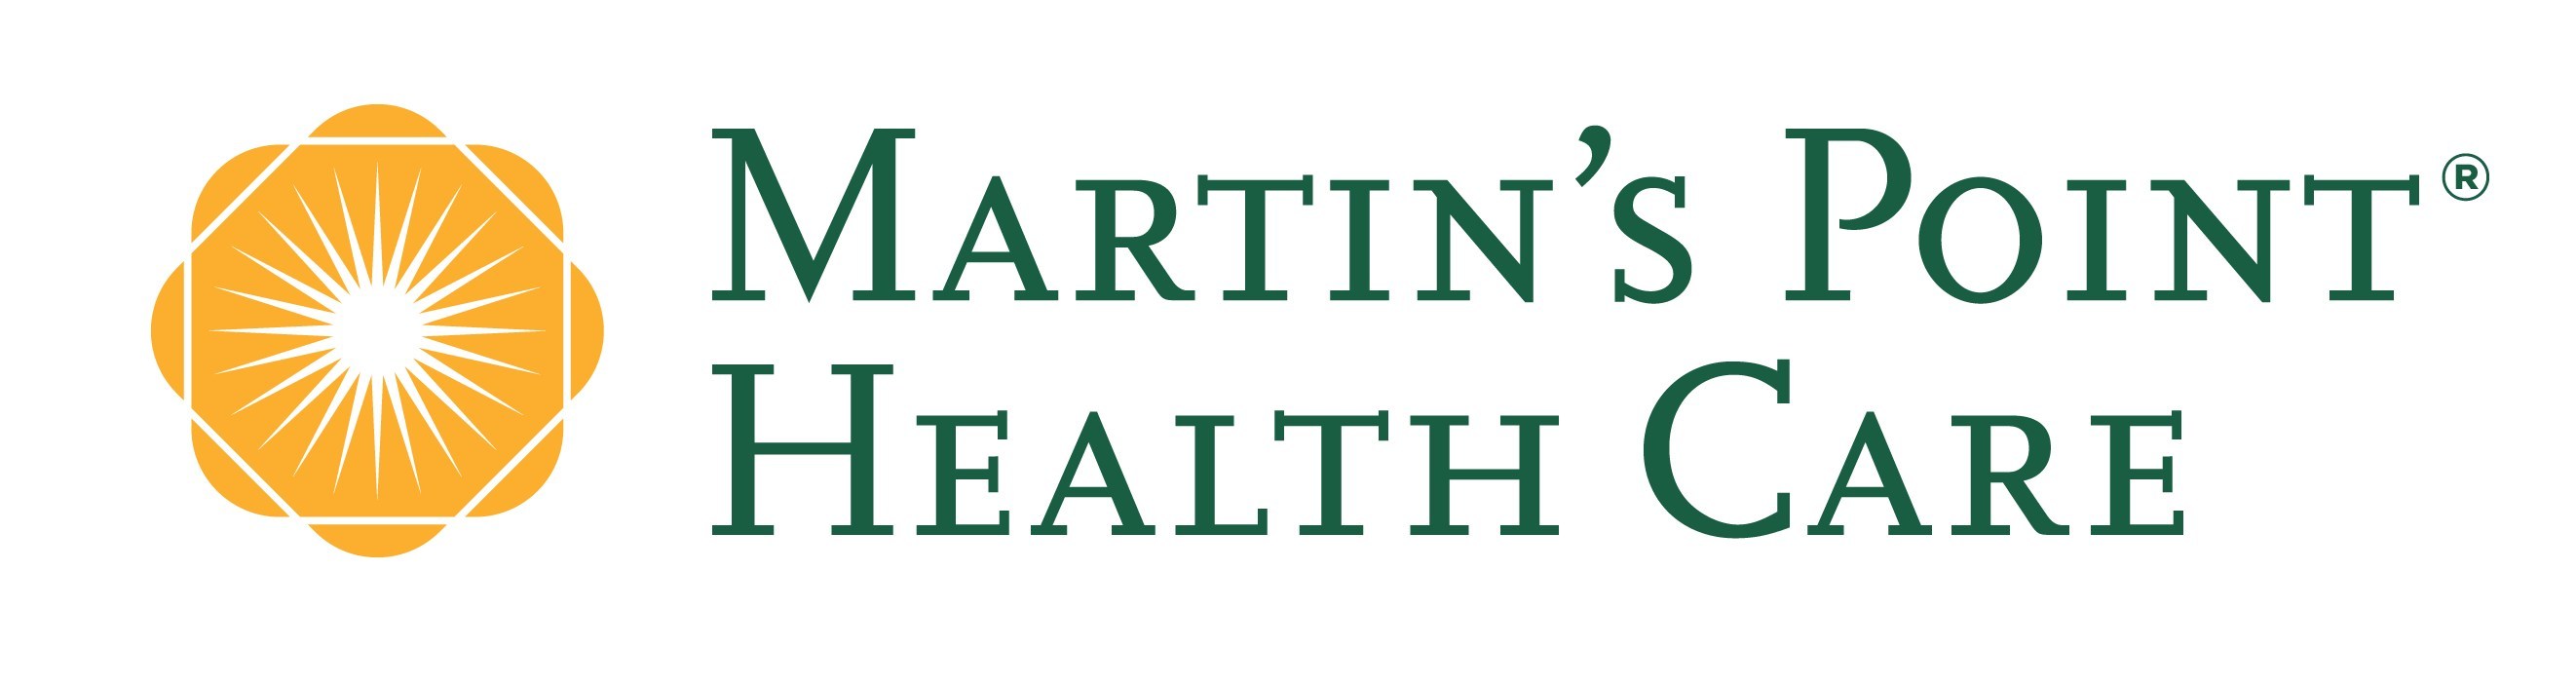 Martin's Point Health Care Is Maine's First Recipient of New Rapid